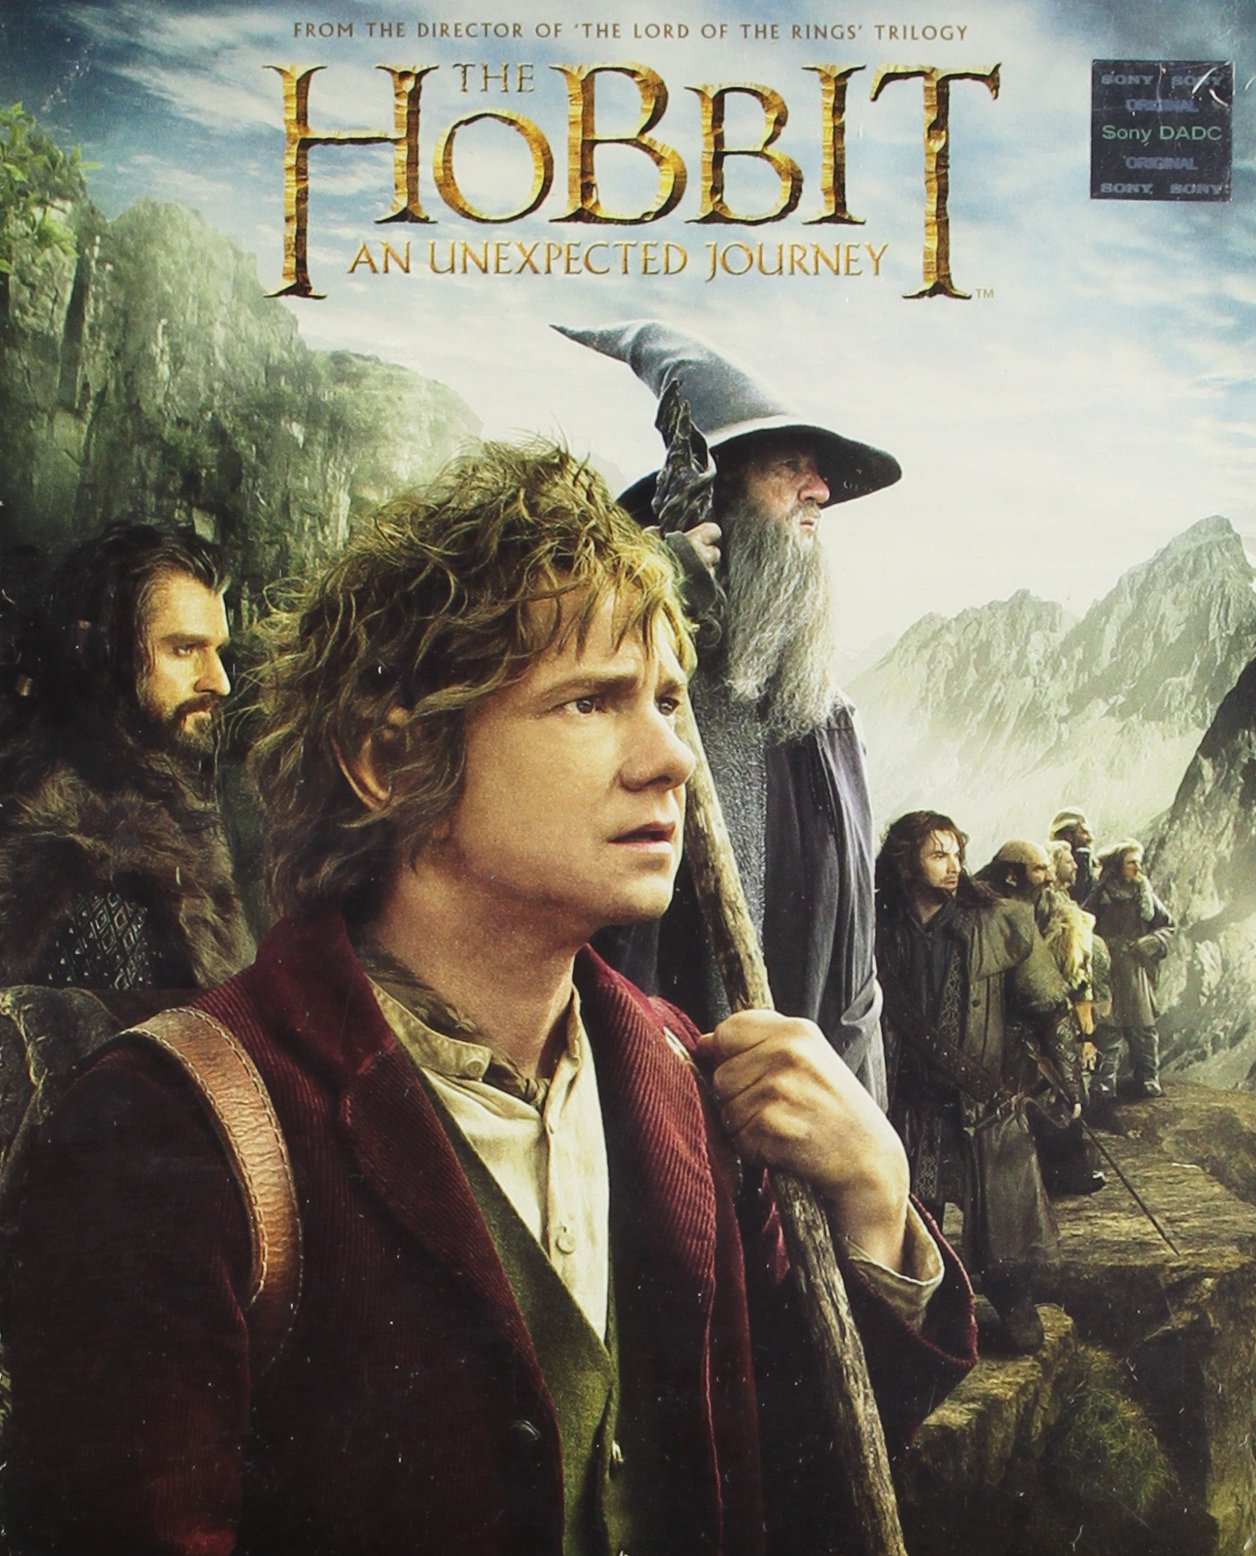 the-hobbit-an-unexpected-journey-movie-purchase-or-watch-online-2